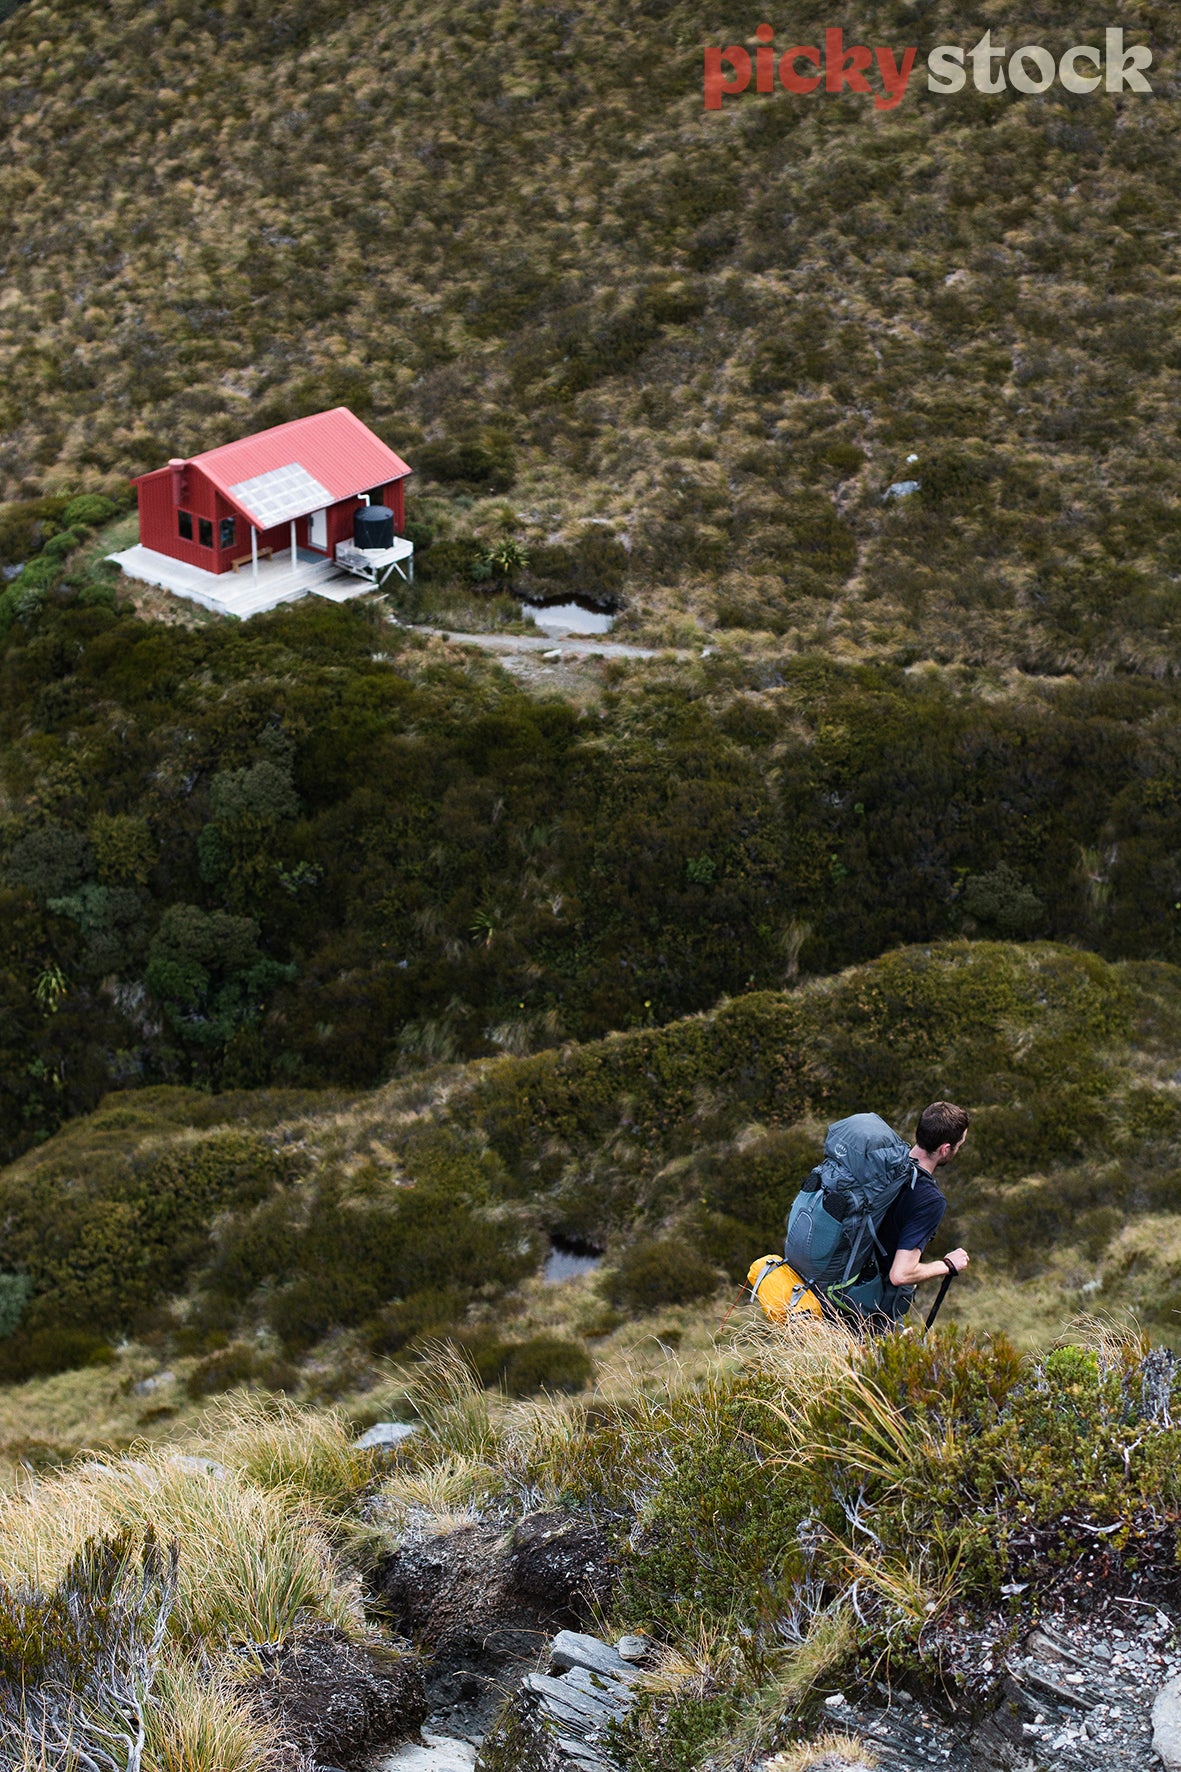 Single tramper hiker with poles walking down to red tramping hut. Hut can be seen in the left corner. Sitting on a white concrete block, with solar panels on the roof. Mountain path is green,. with some mountain tussock. Blue tramping back, with yellow sleeping bag